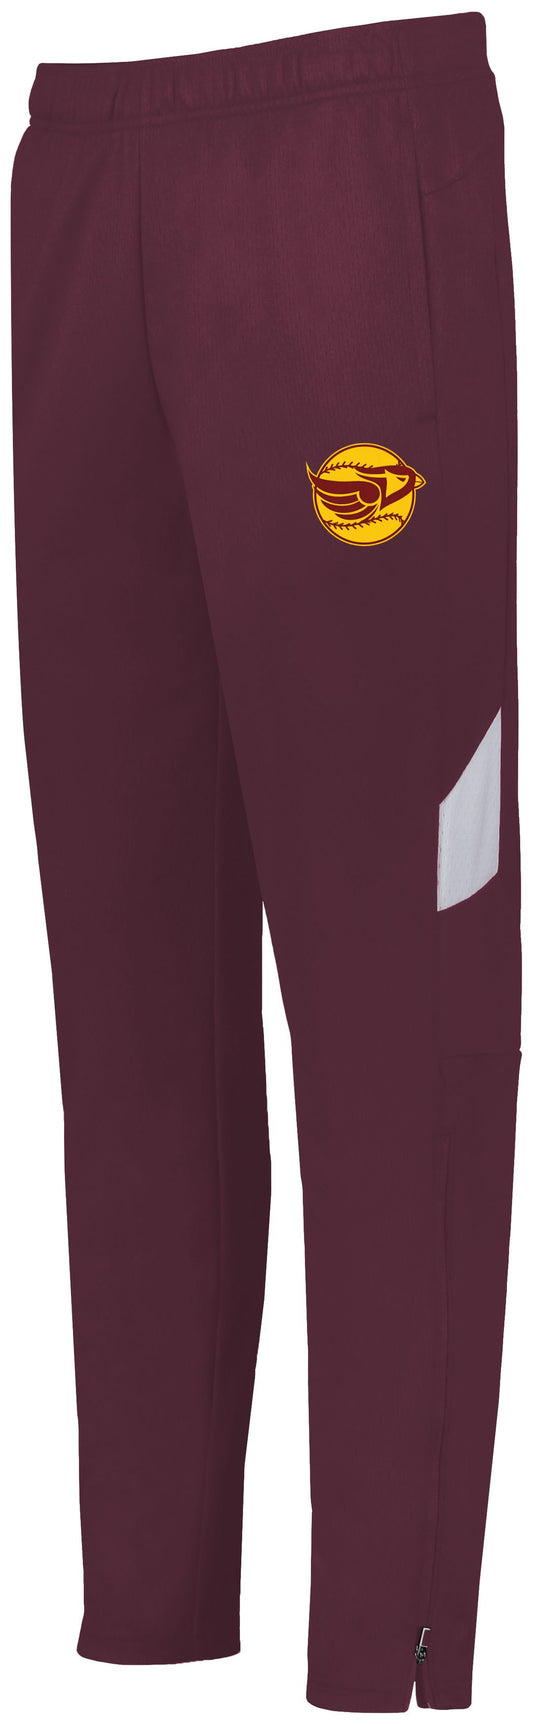 Cards Fastpitch Limitless Pant